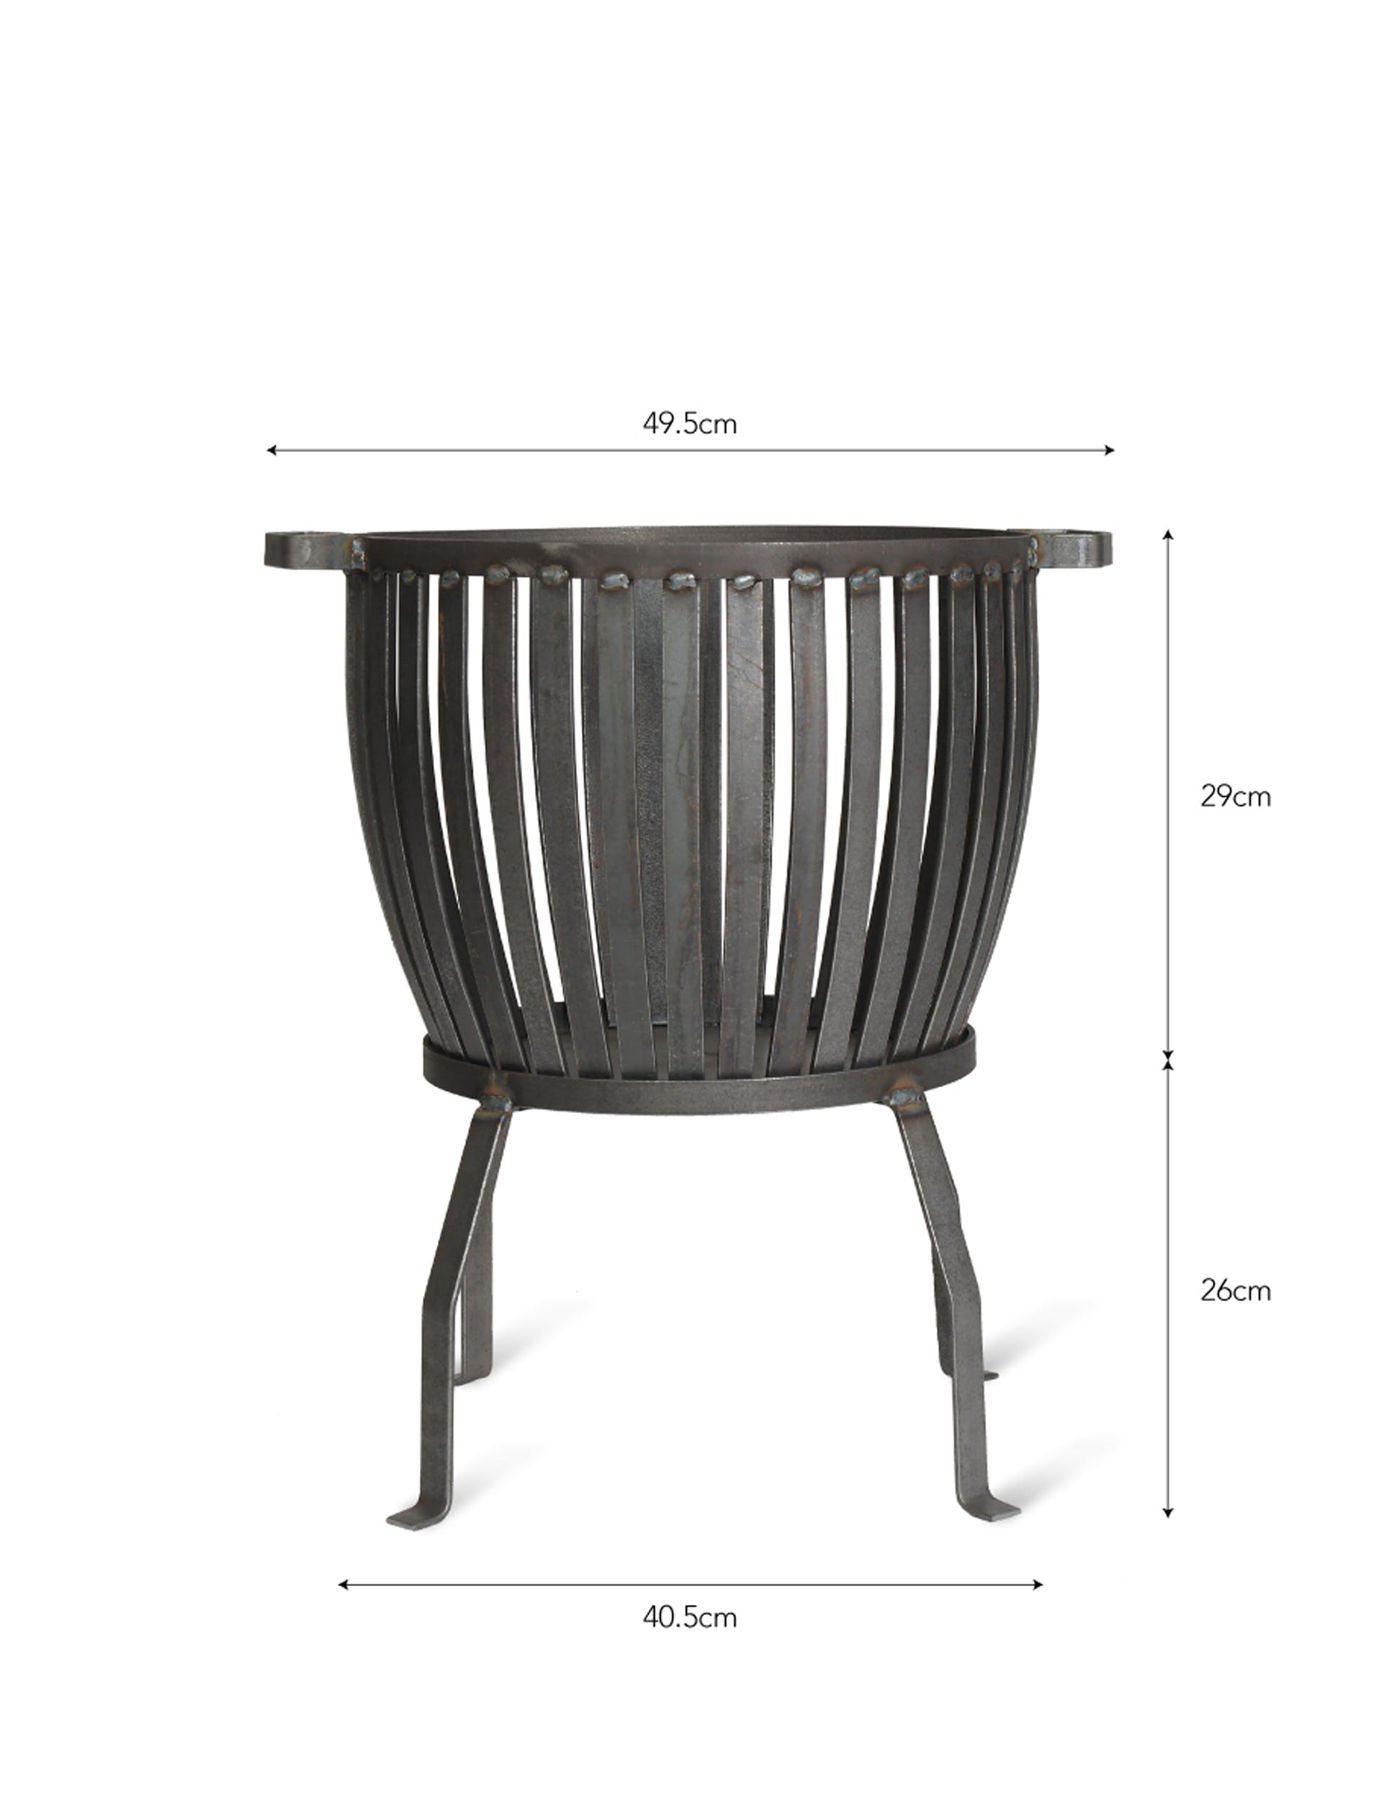 Bould Small Basket Fire Pit Dimensions